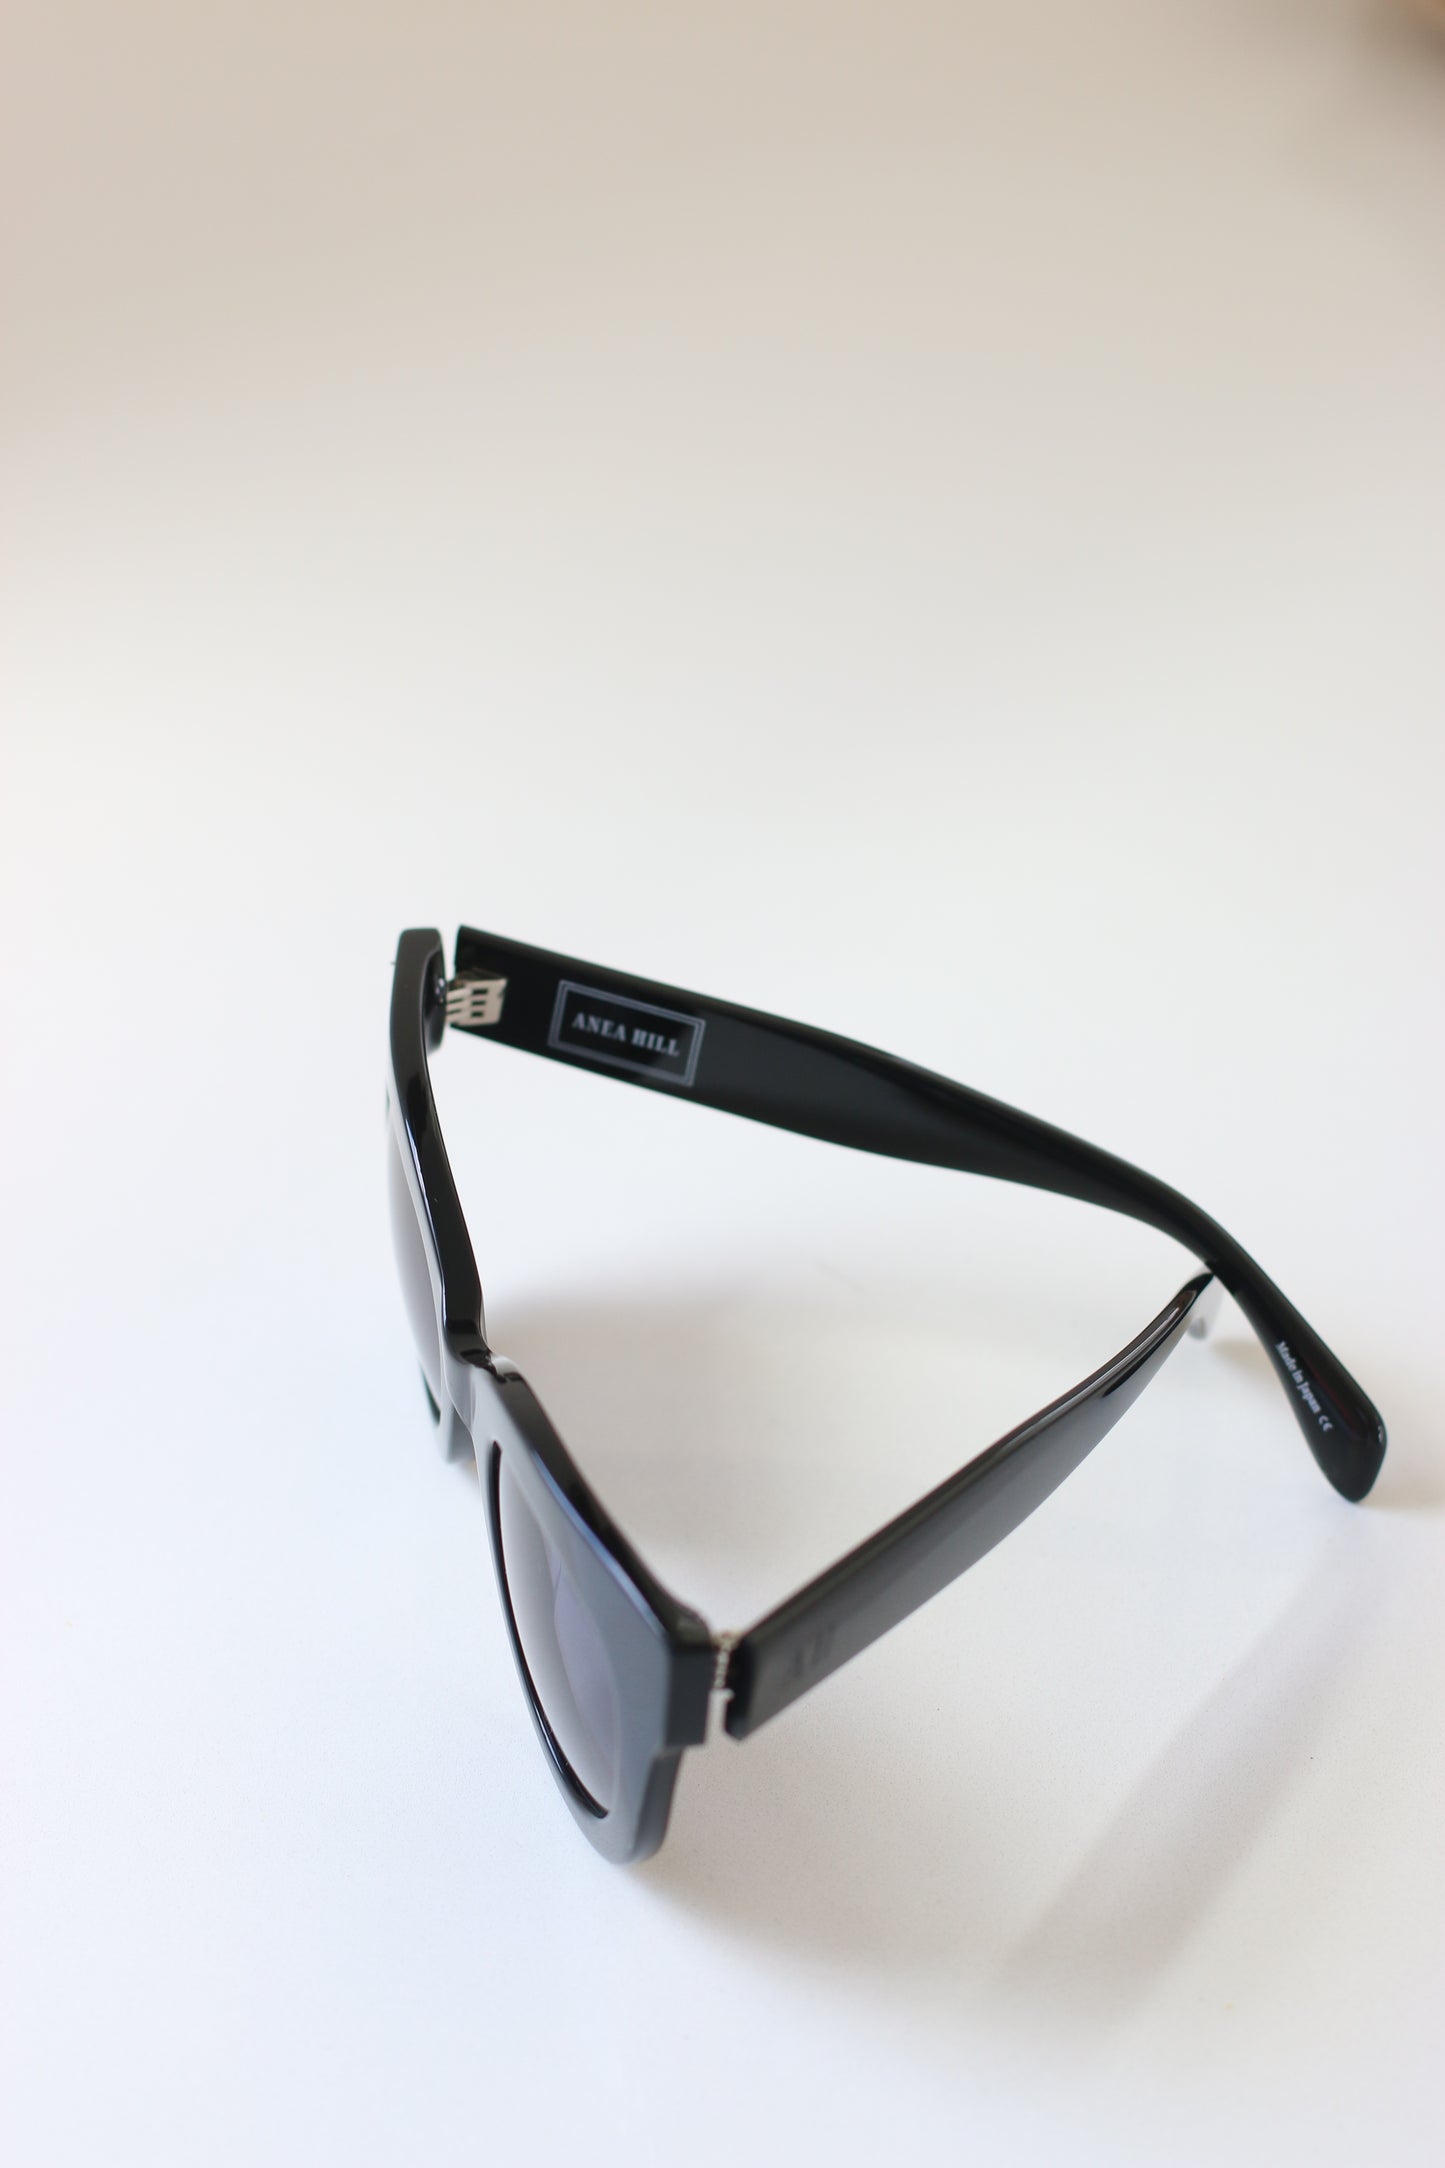 Chic and trendy black acetate sunglasses with silver hinges